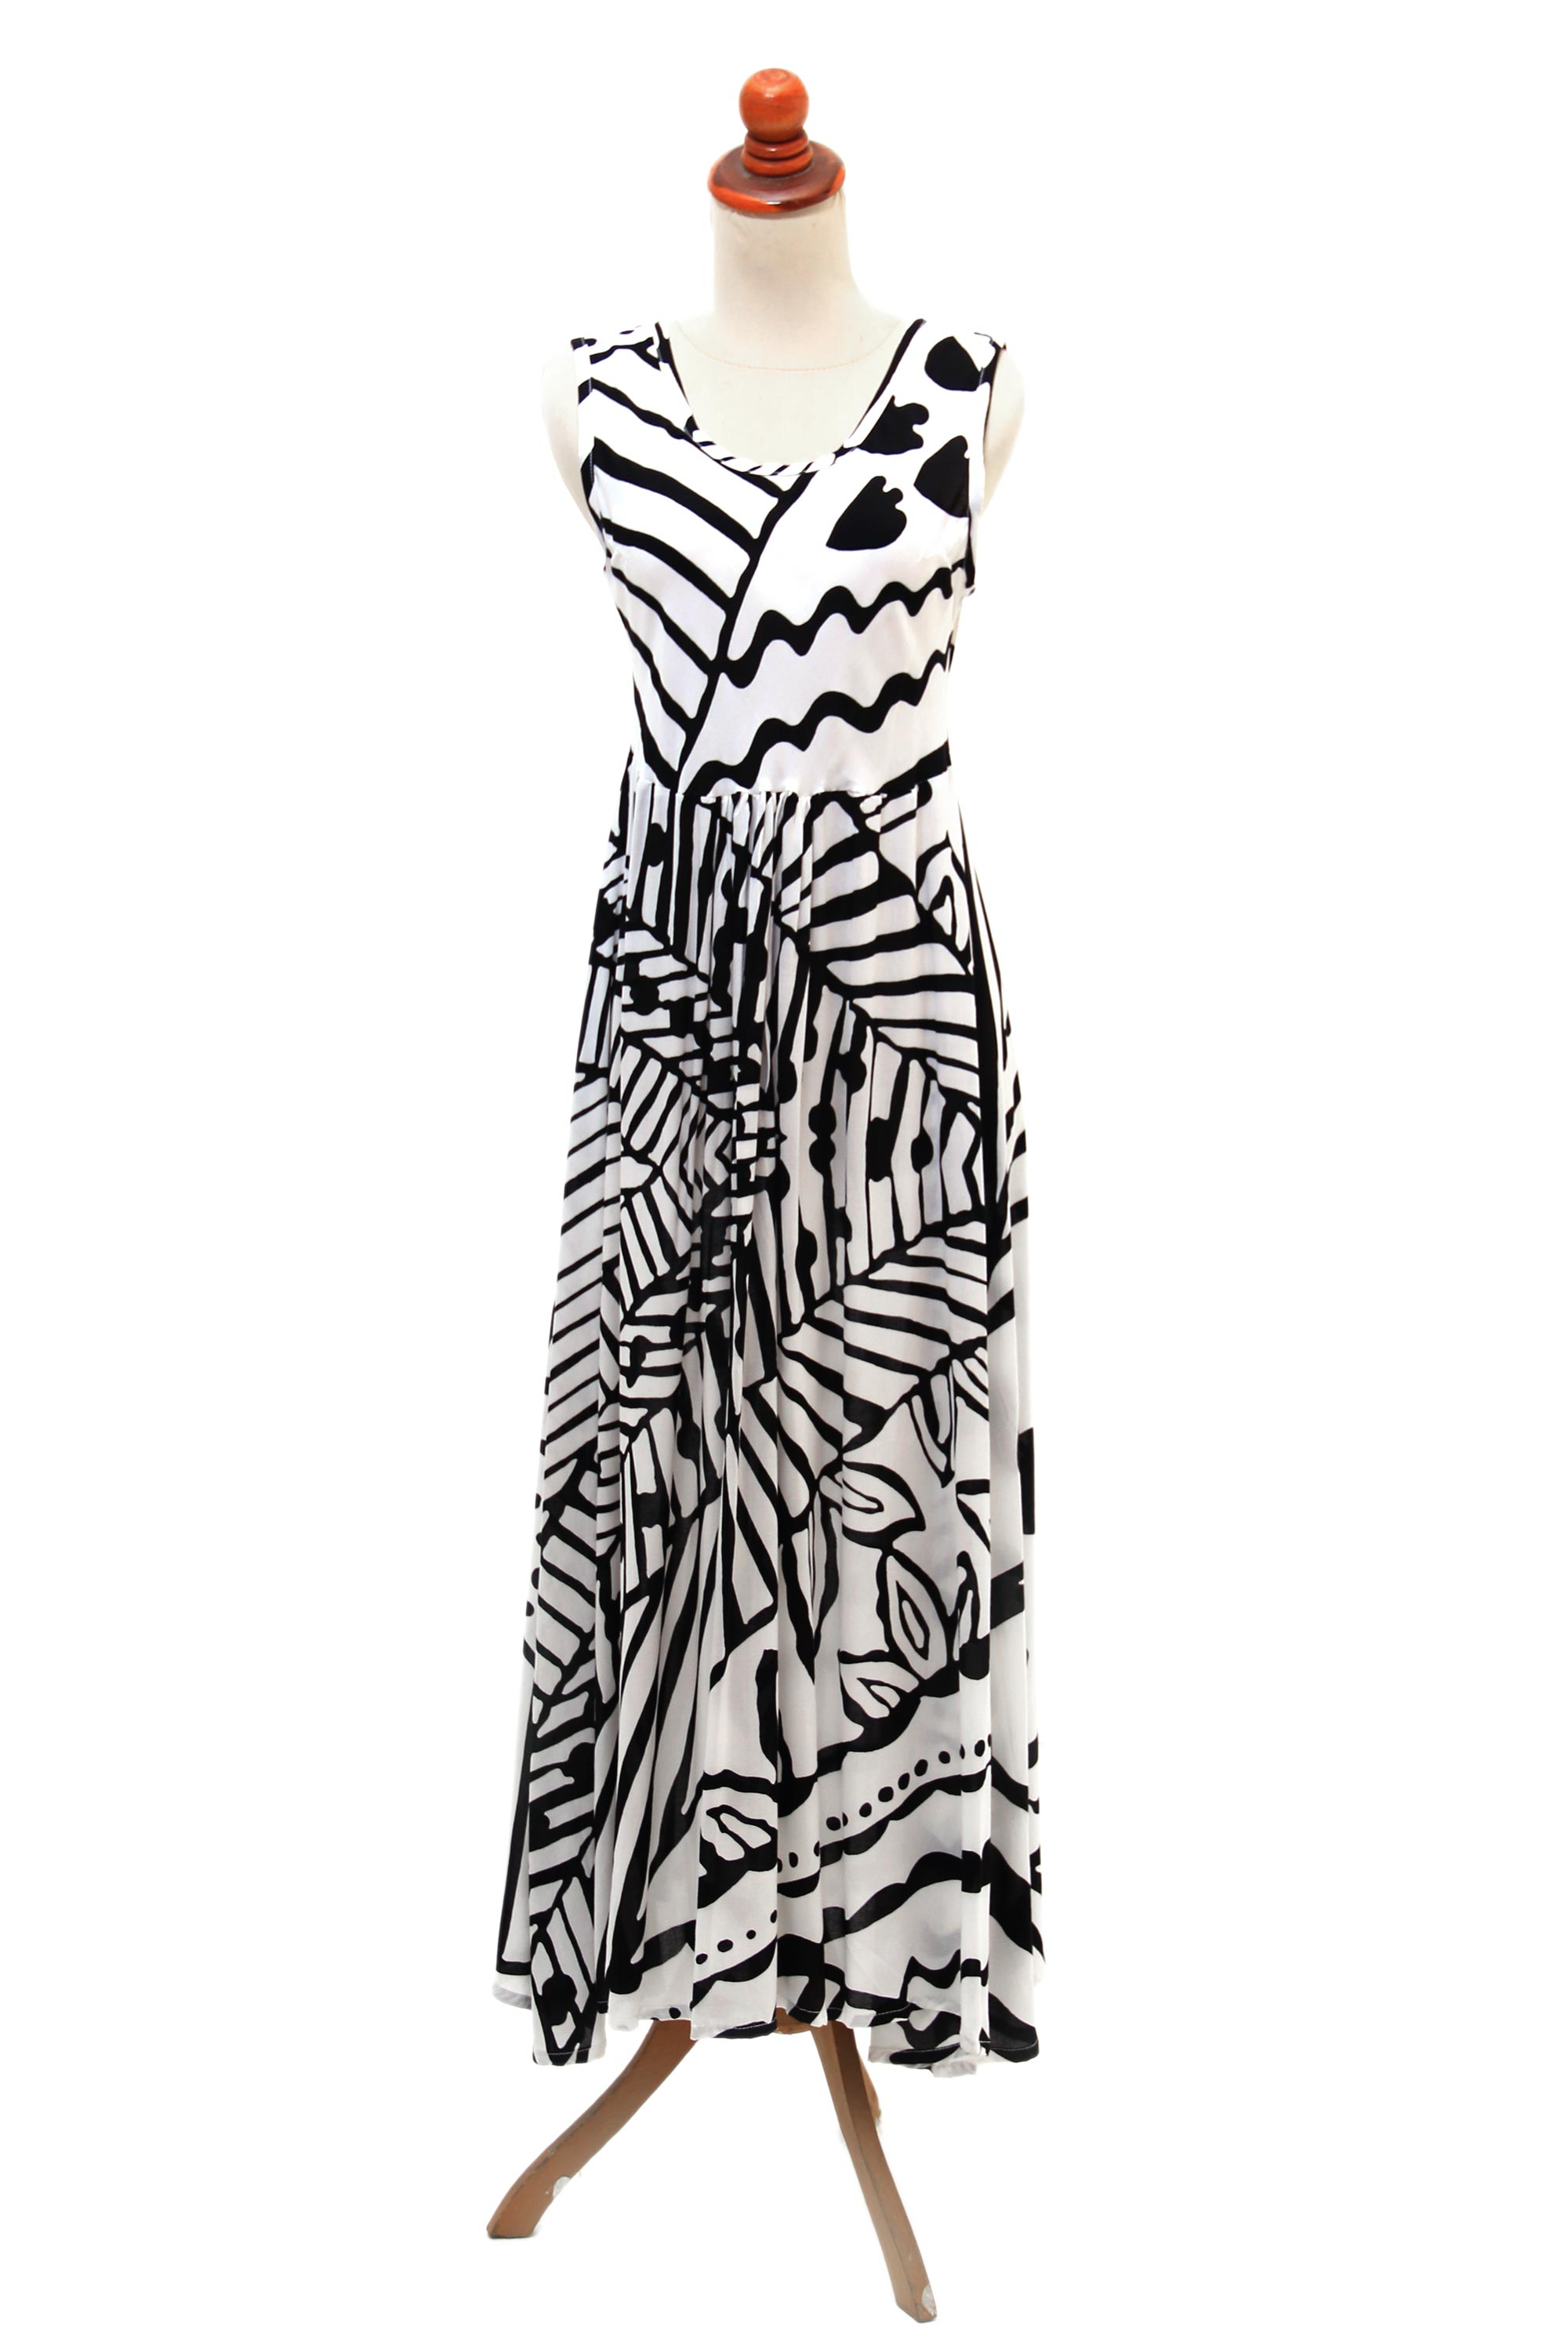 Onyx and Eggshell Rayon A-Line Dress from Bali - Black and White Jungle ...